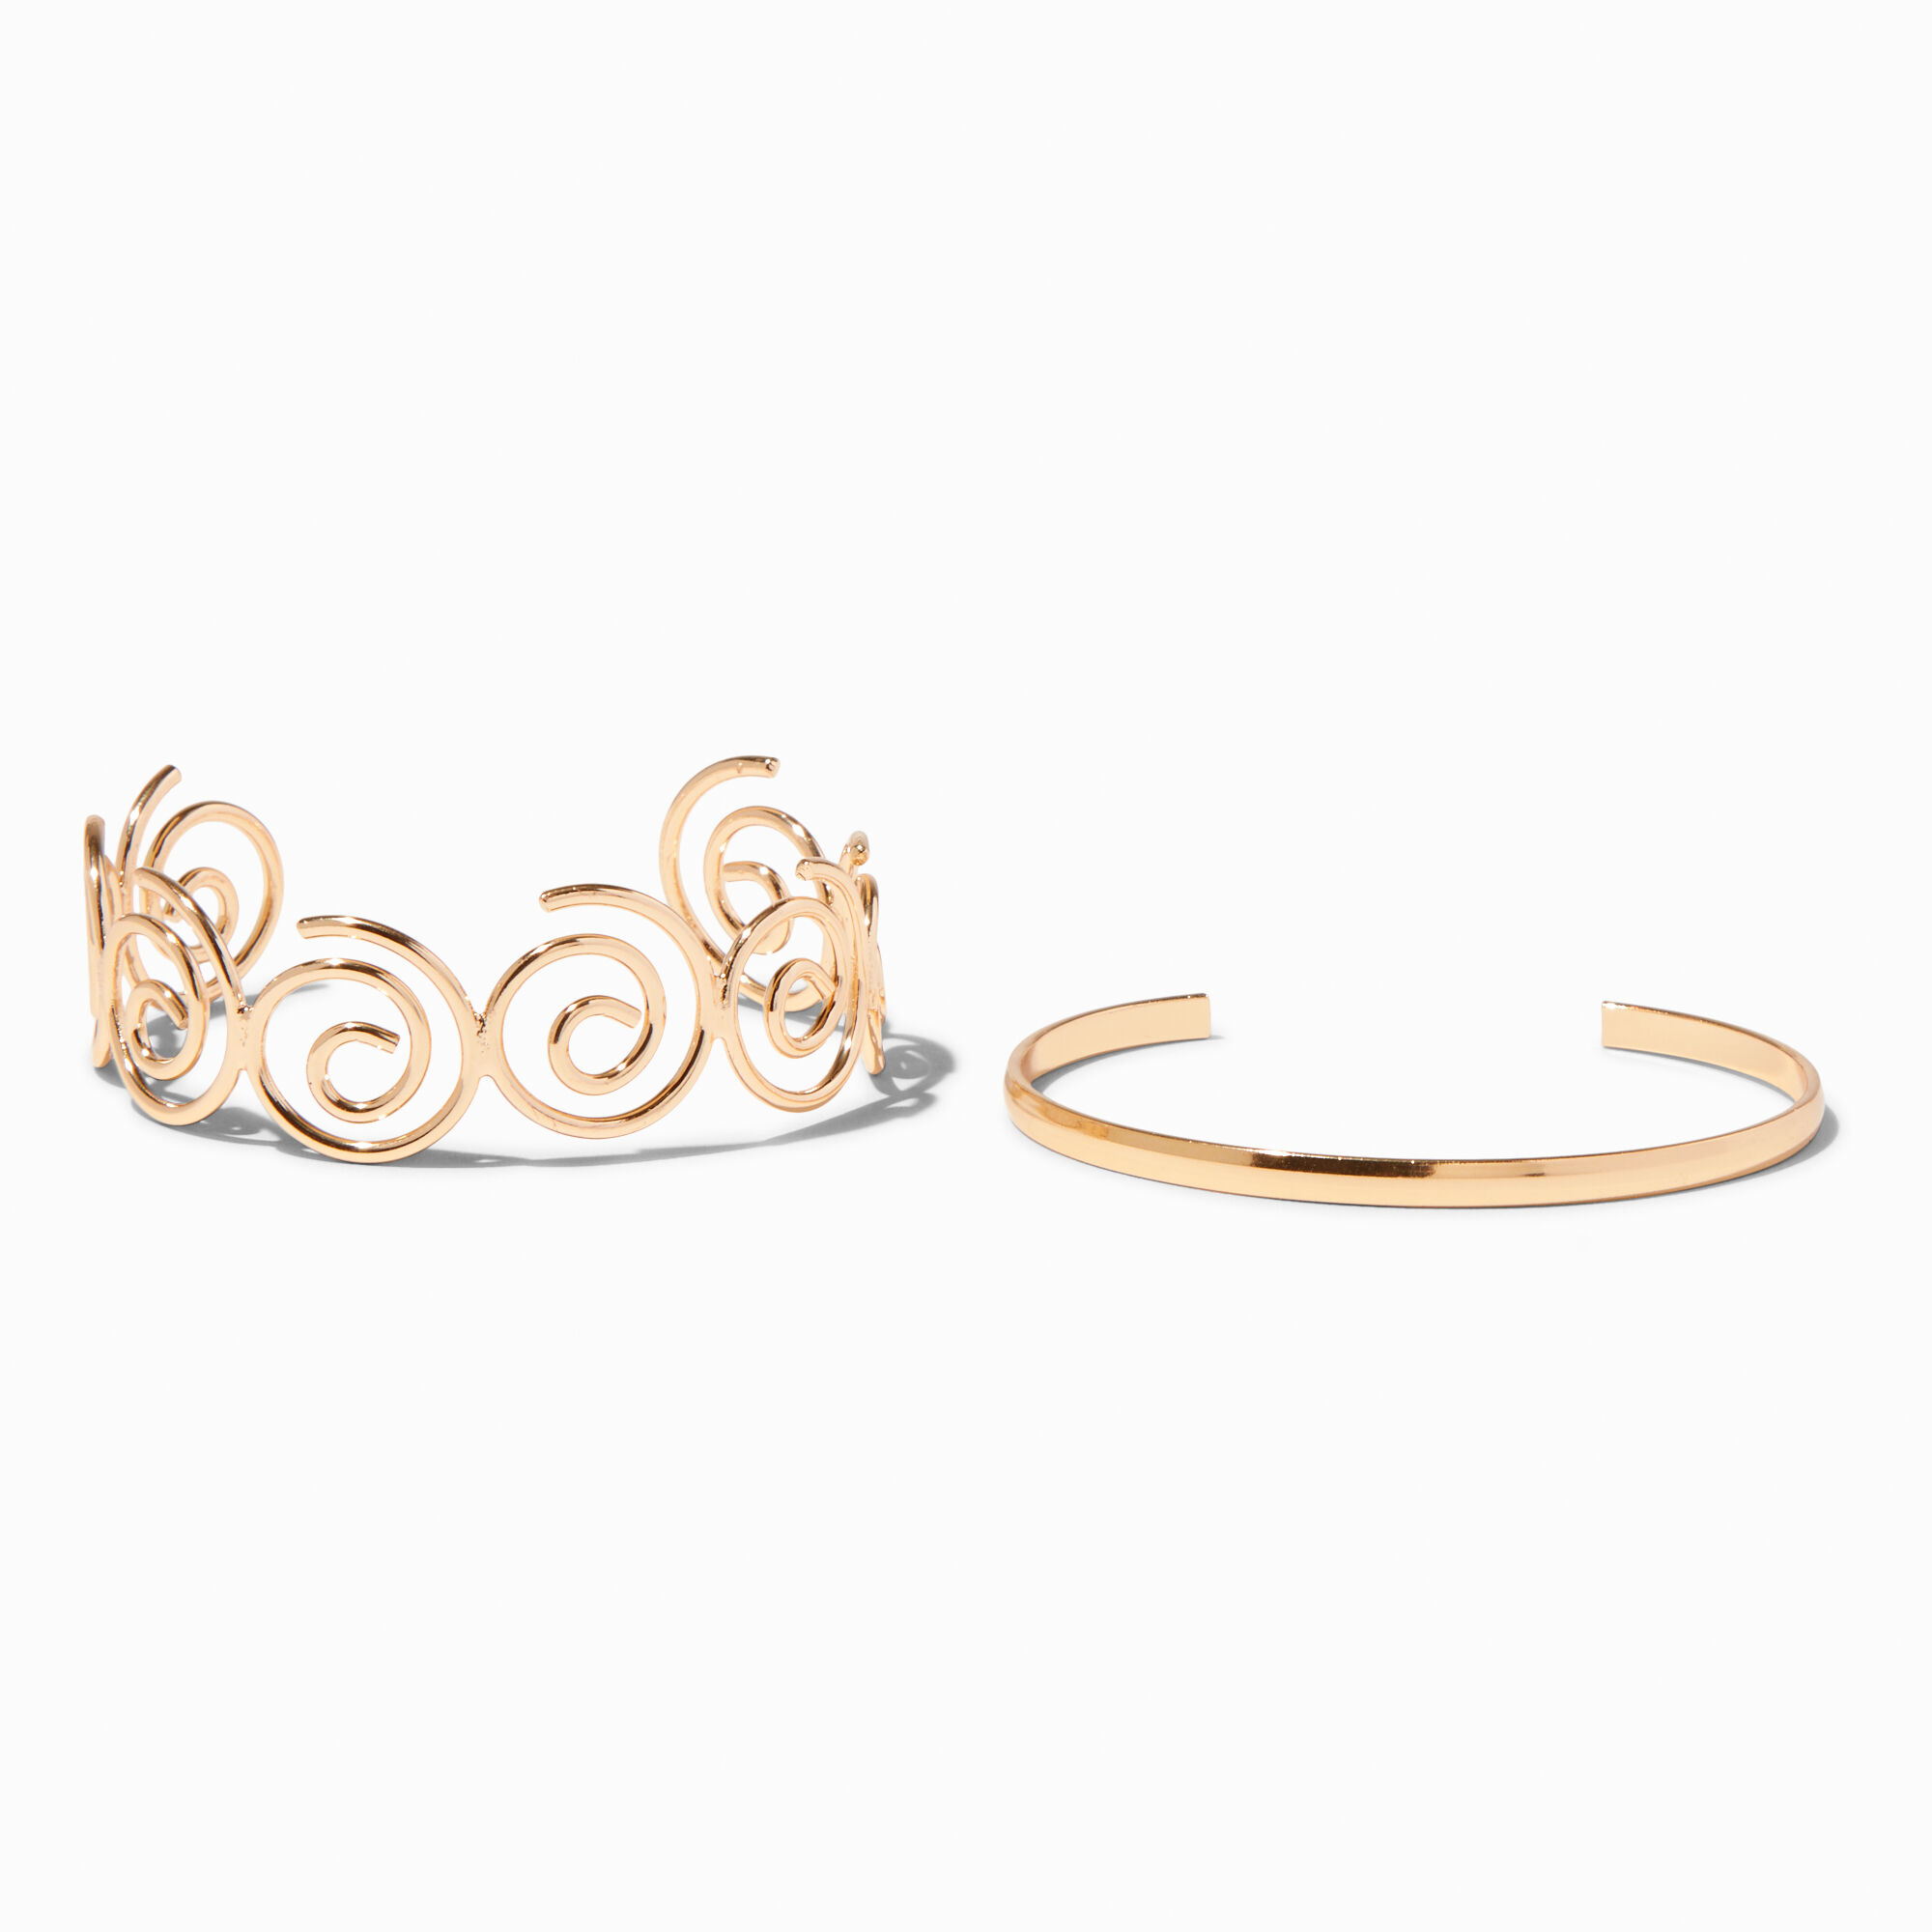 View Claires Tone Swirl Cuff Bracelet Set 2 Pack Gold information